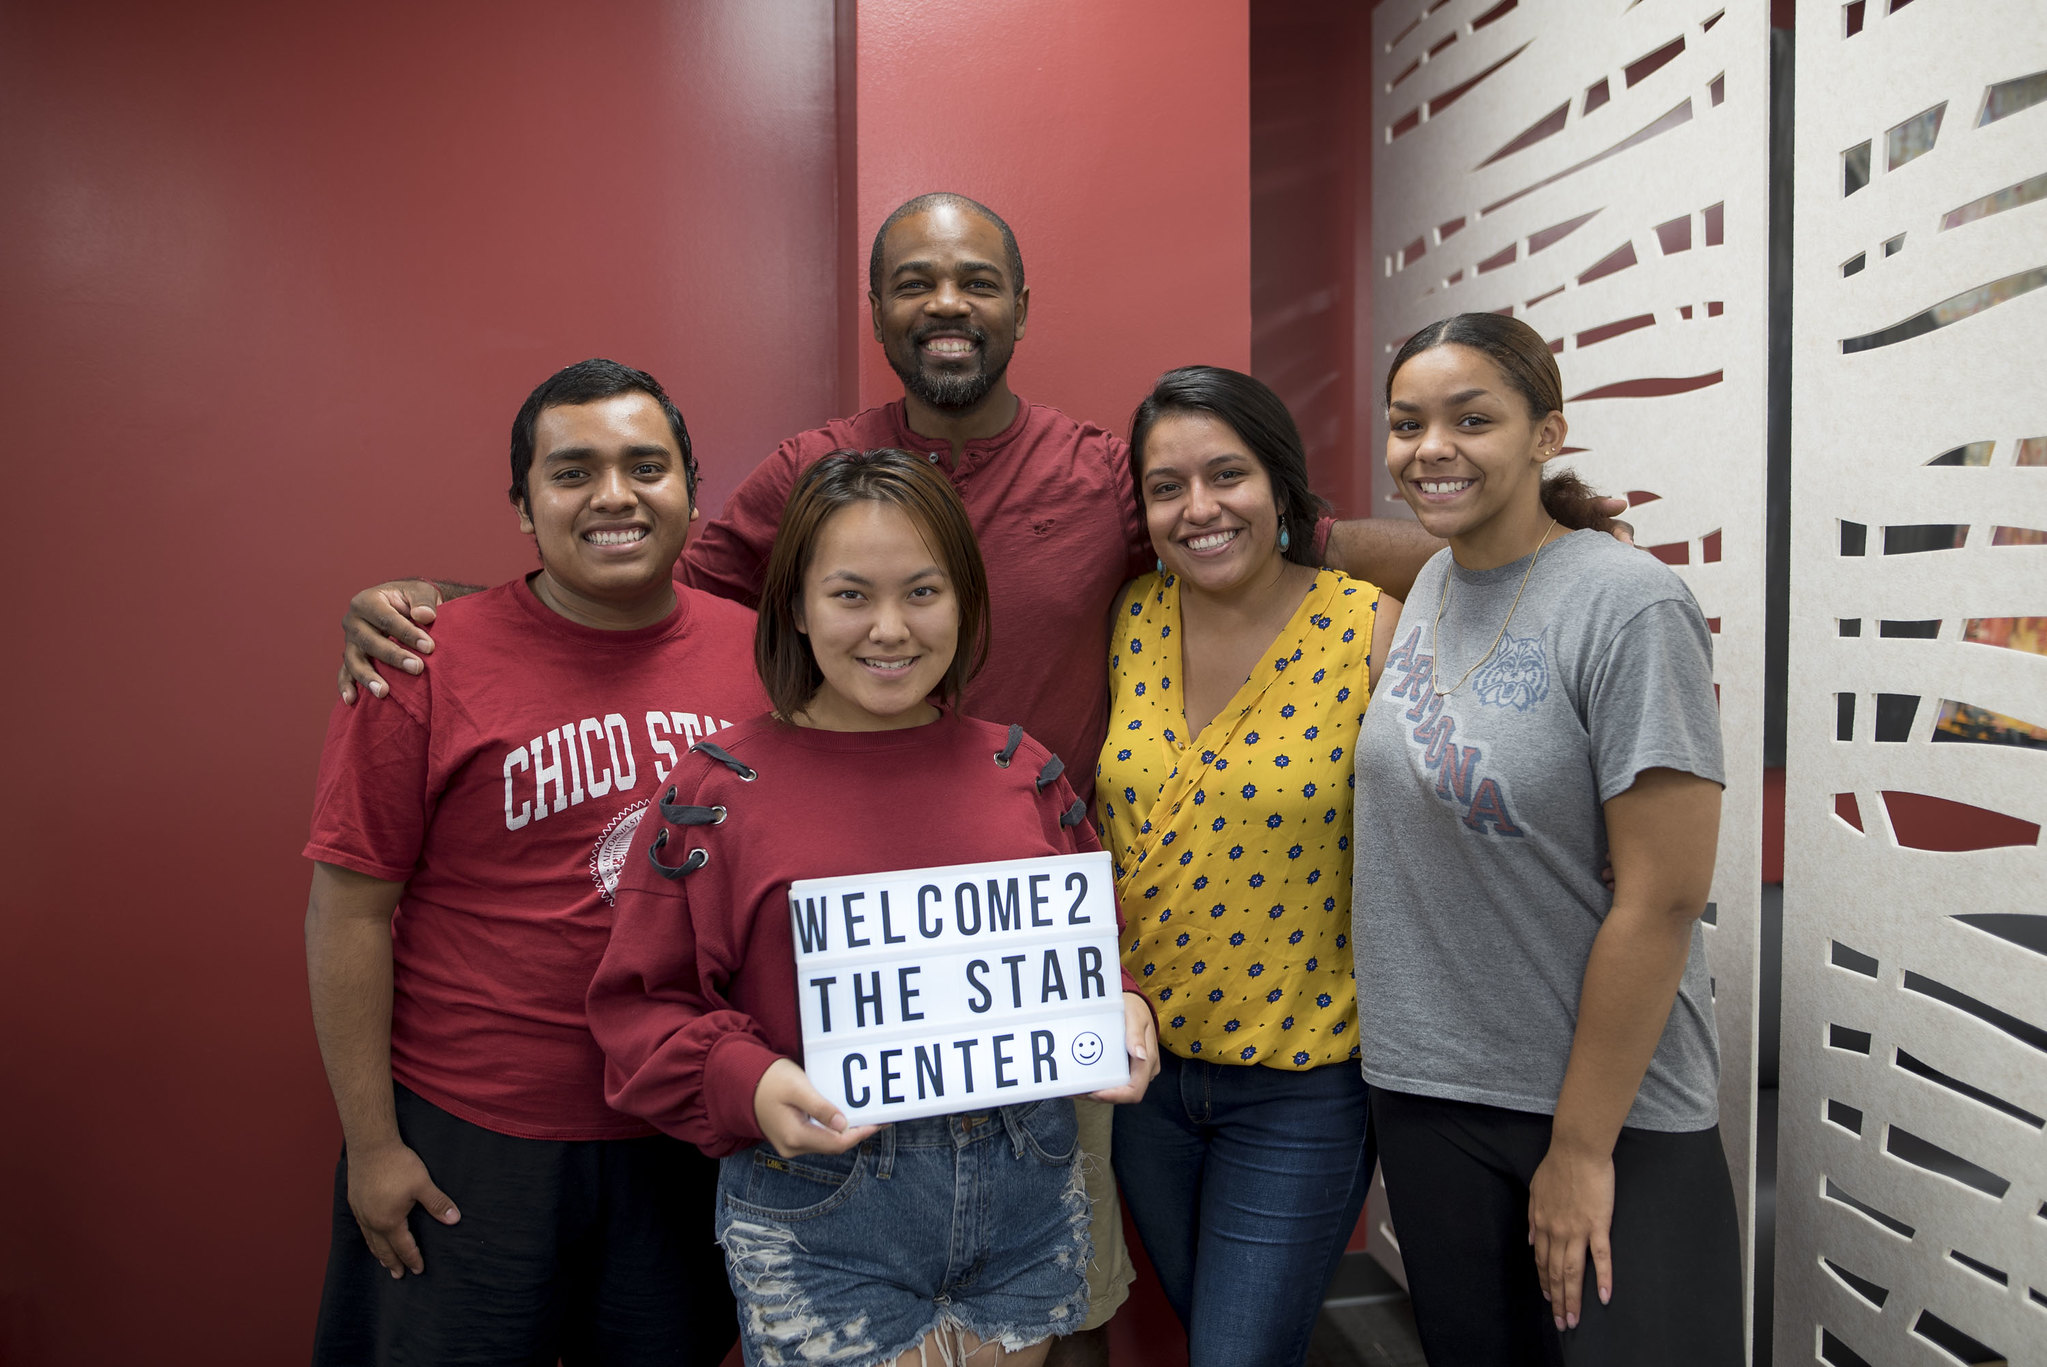 Several peer advisors smile while holding a welcome sign